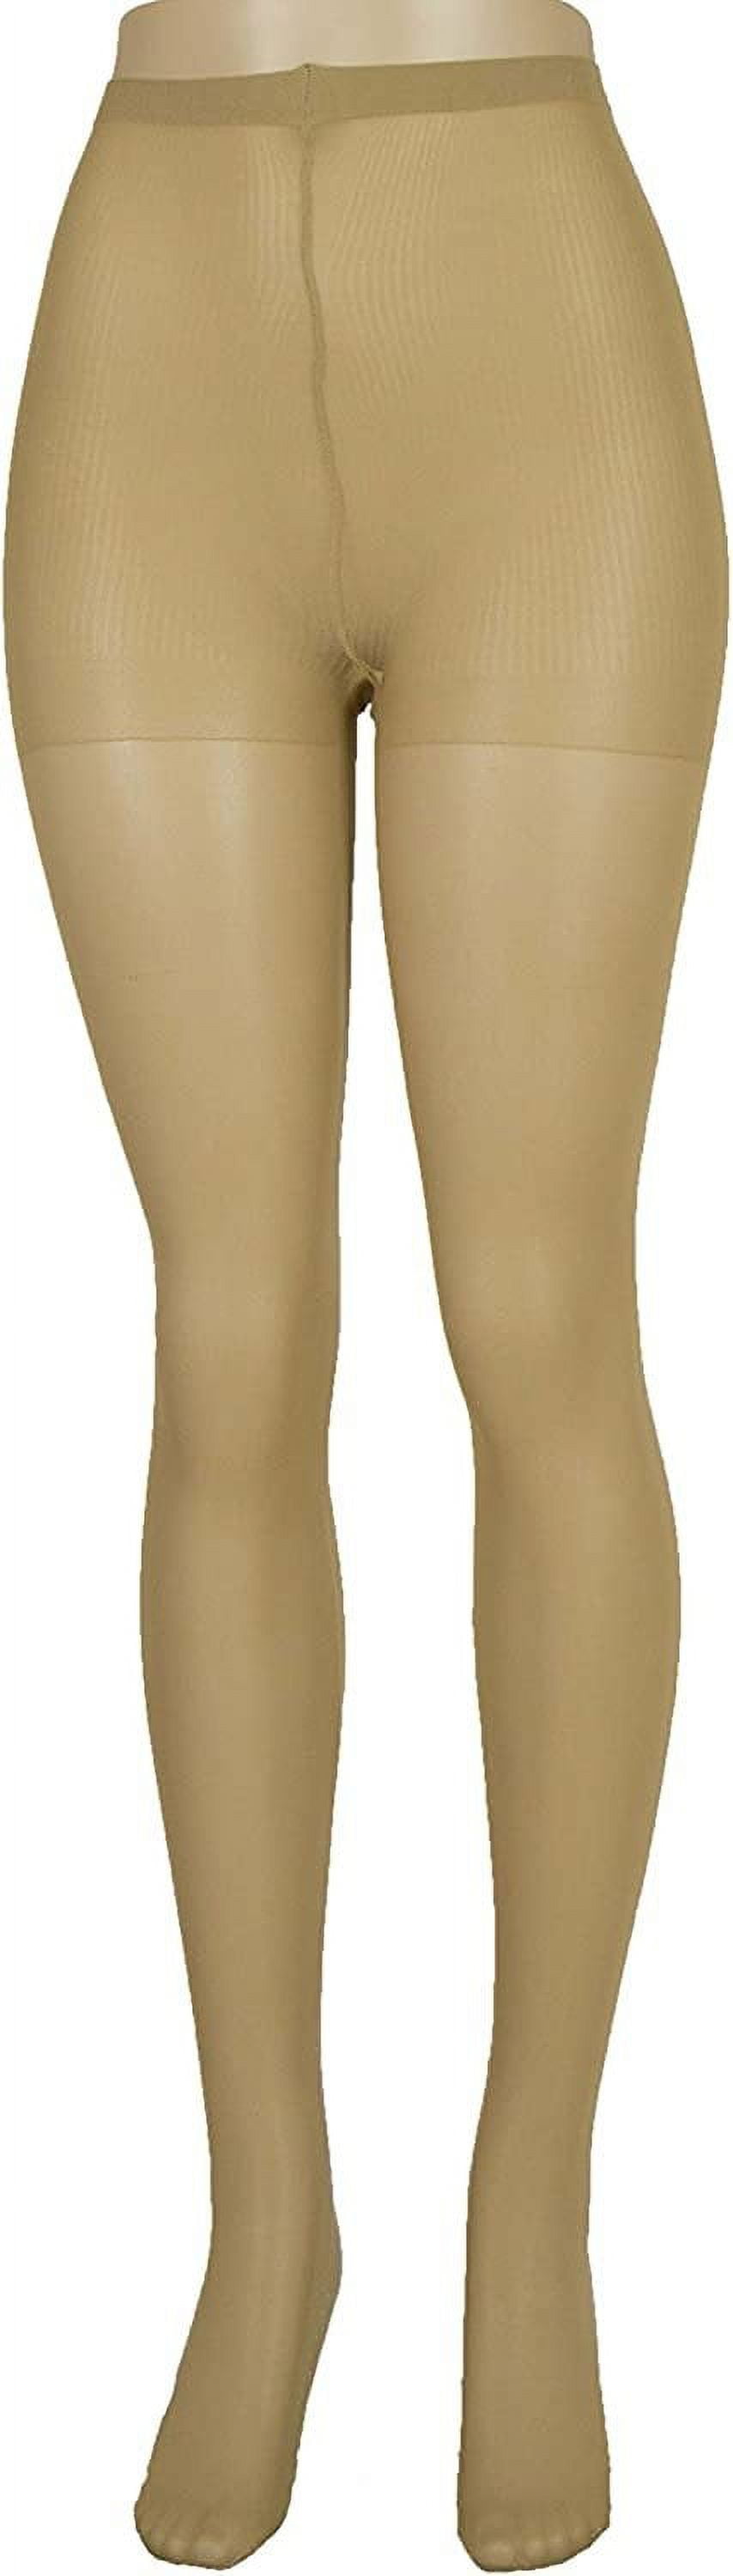 Lissele Women's Plus Size Day Sheer Pantyhose (Pack of 3) (Off